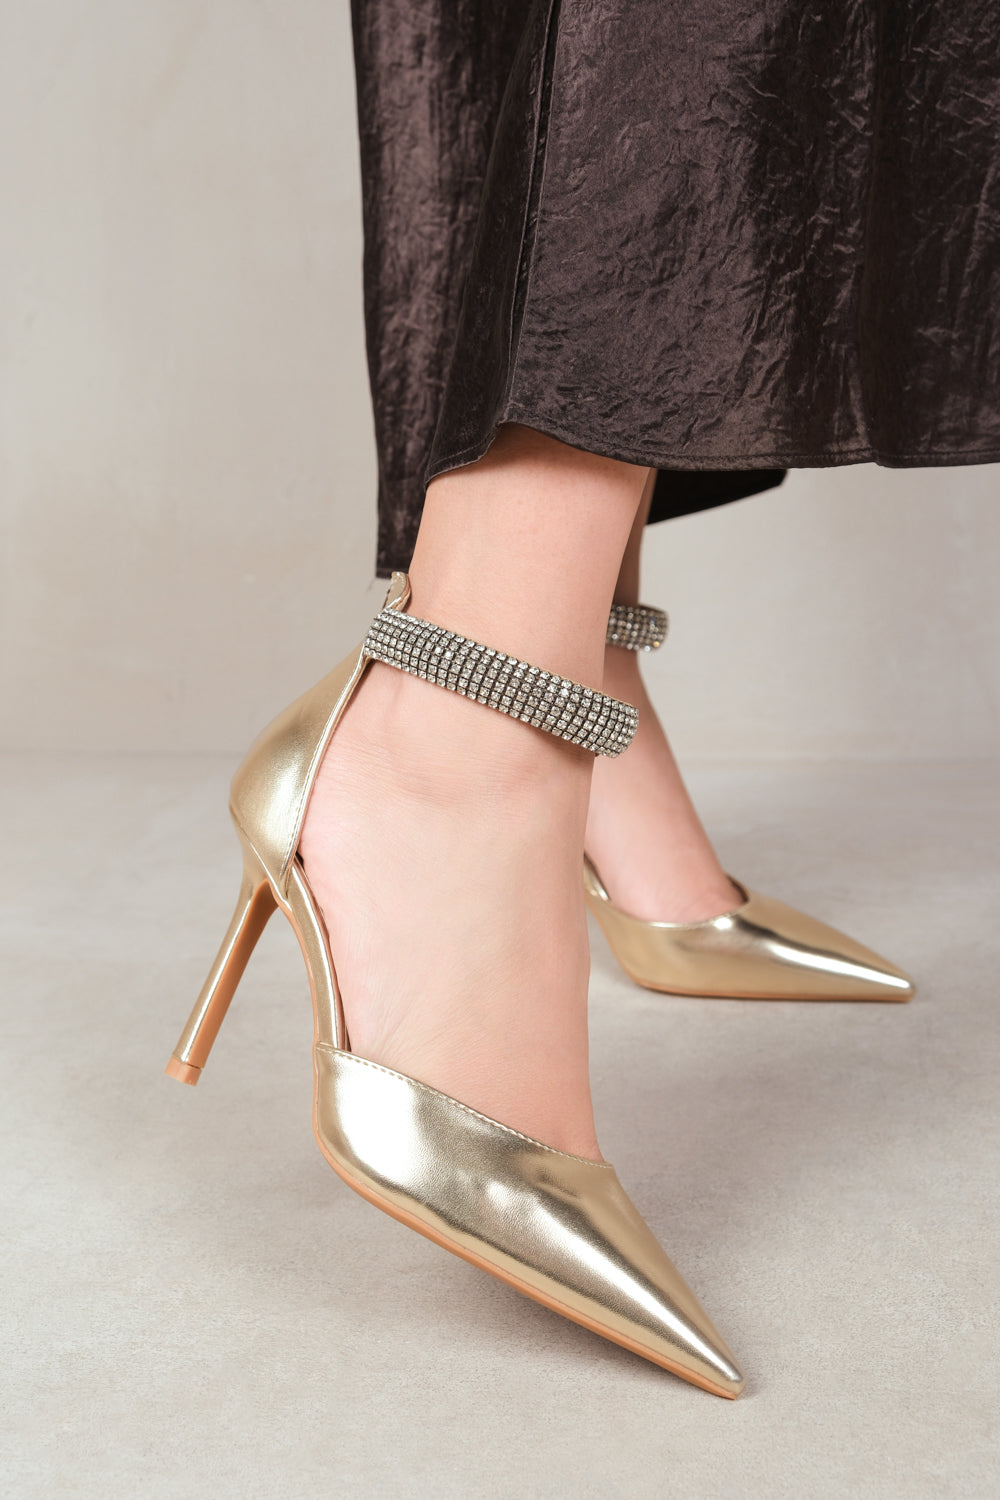 SAPPHIRE POINTED TOE HIGH HEELS WITH DIAMANTE DETAIL ANKLE STRAP IN GOLD METALLIC